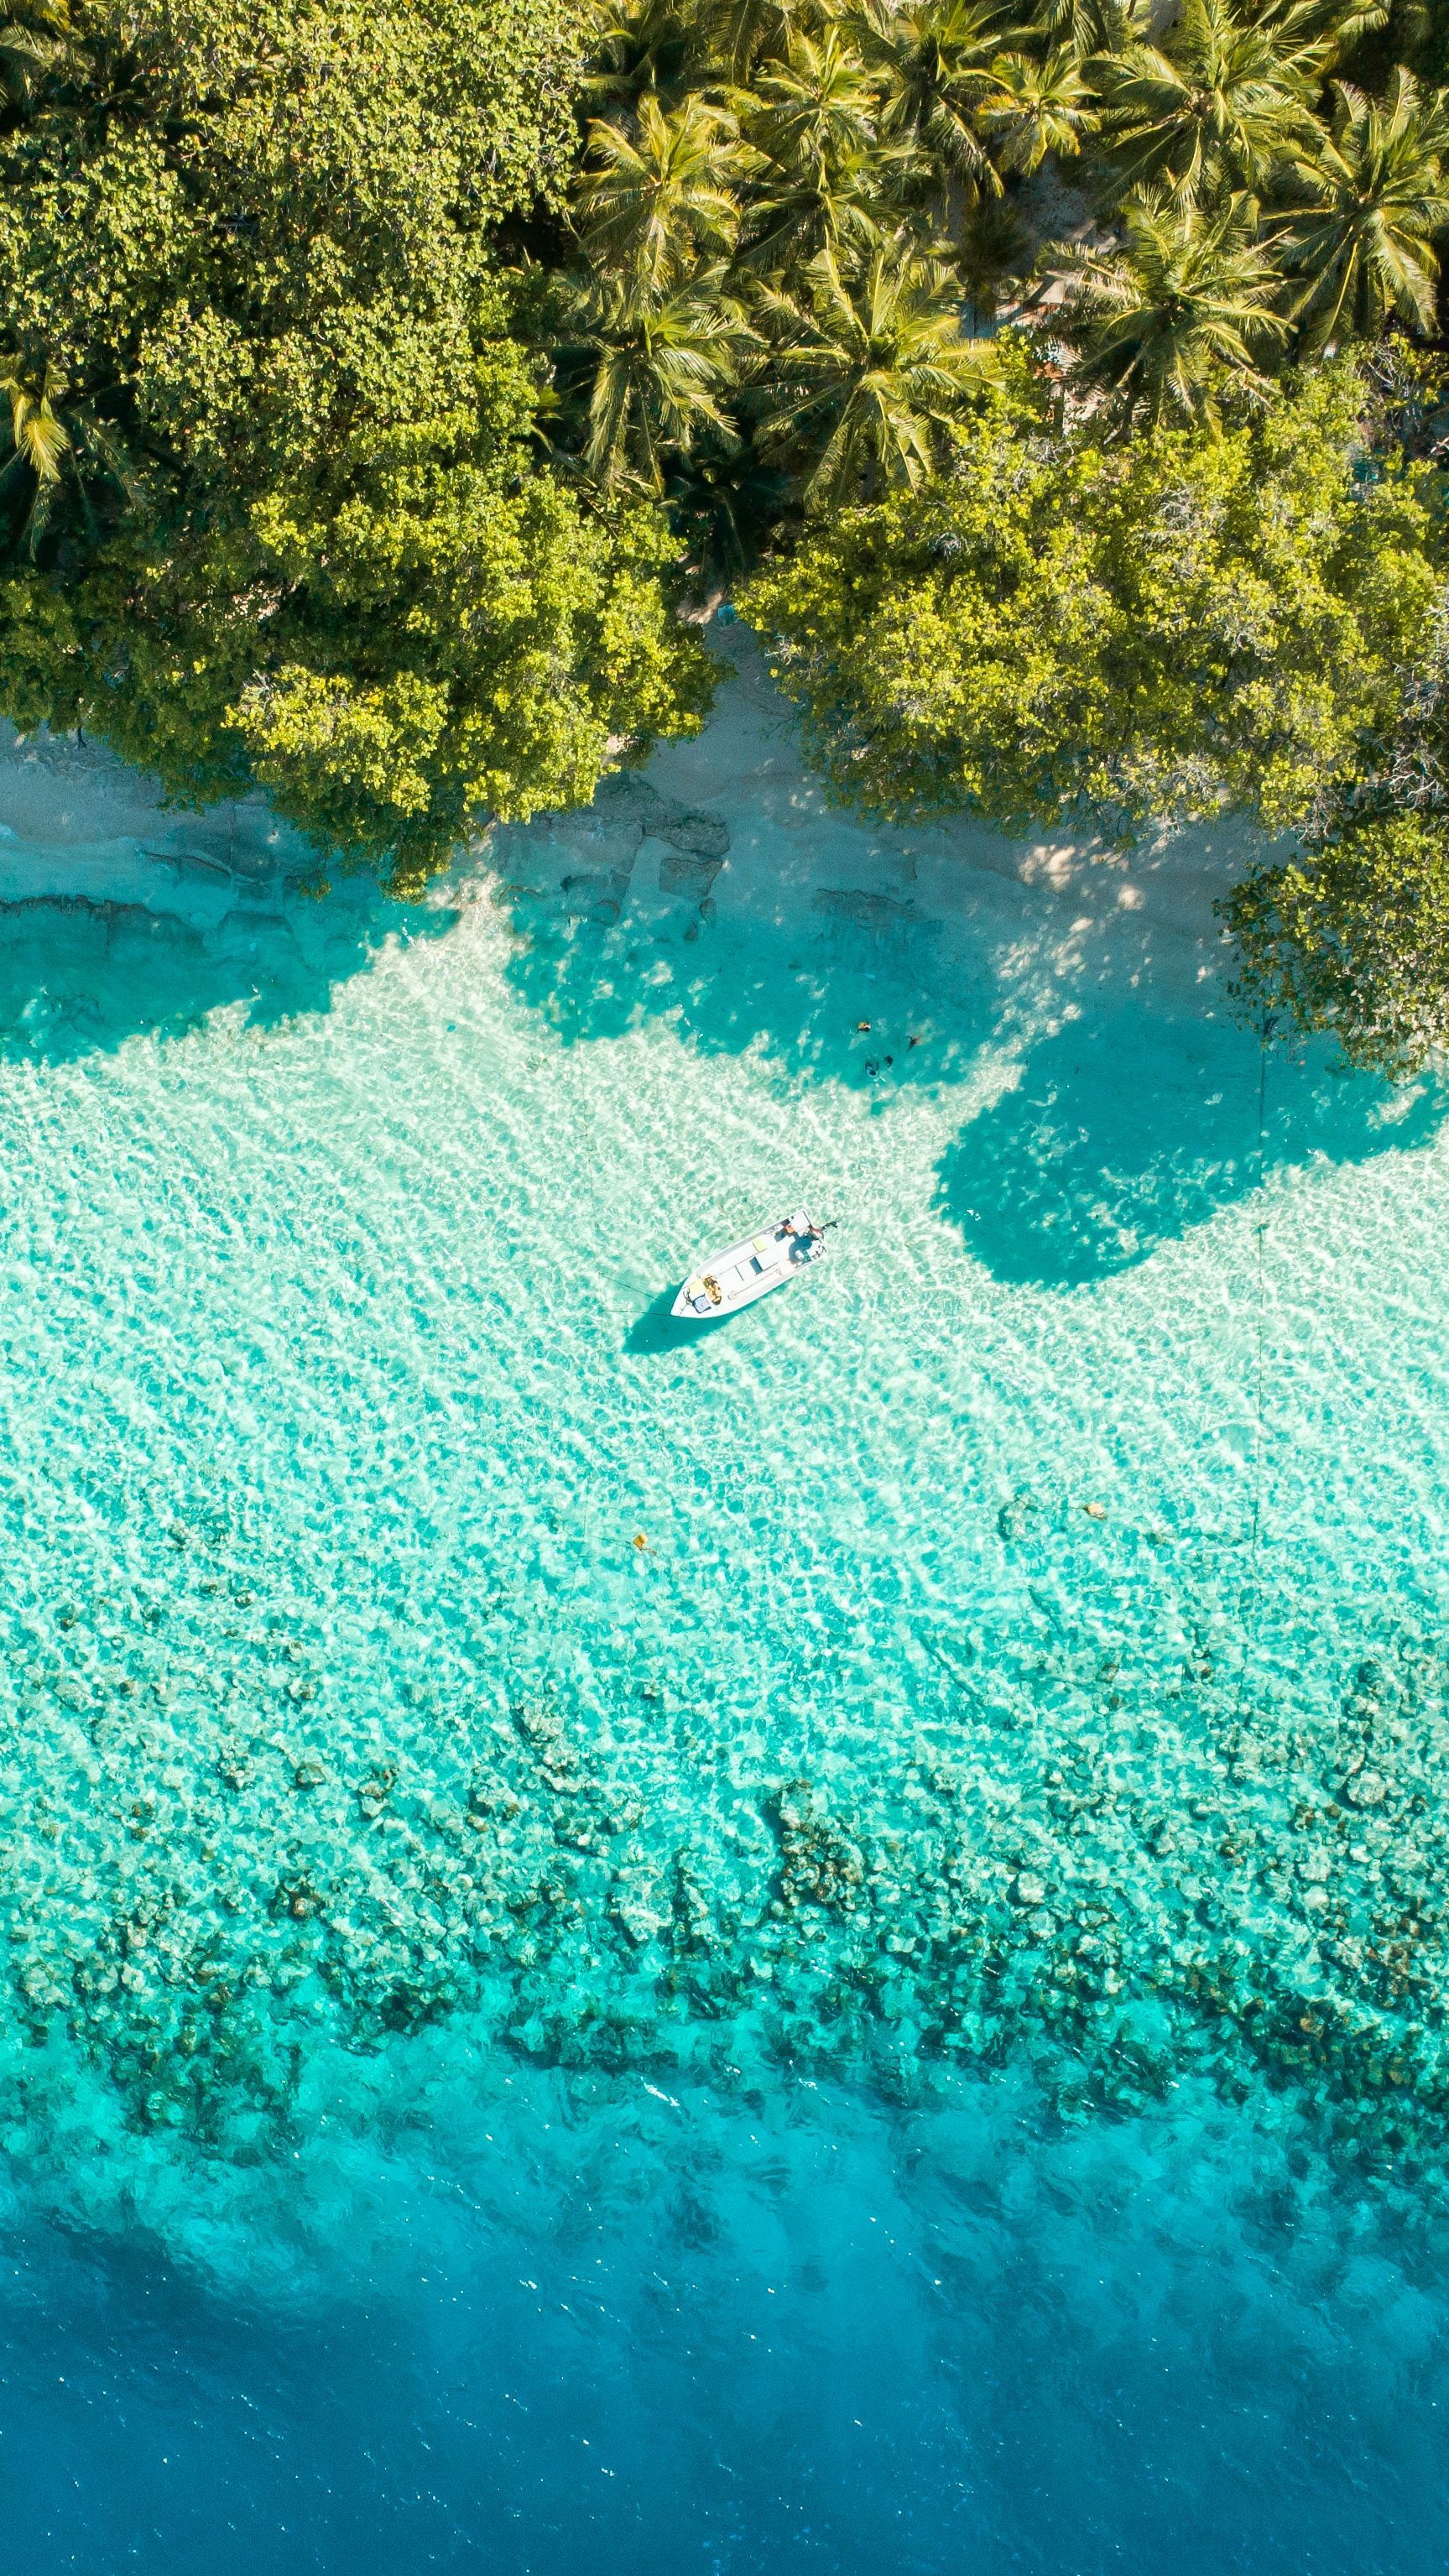 An aerial view of a boat in the middle of the ocean surrounded by trees.